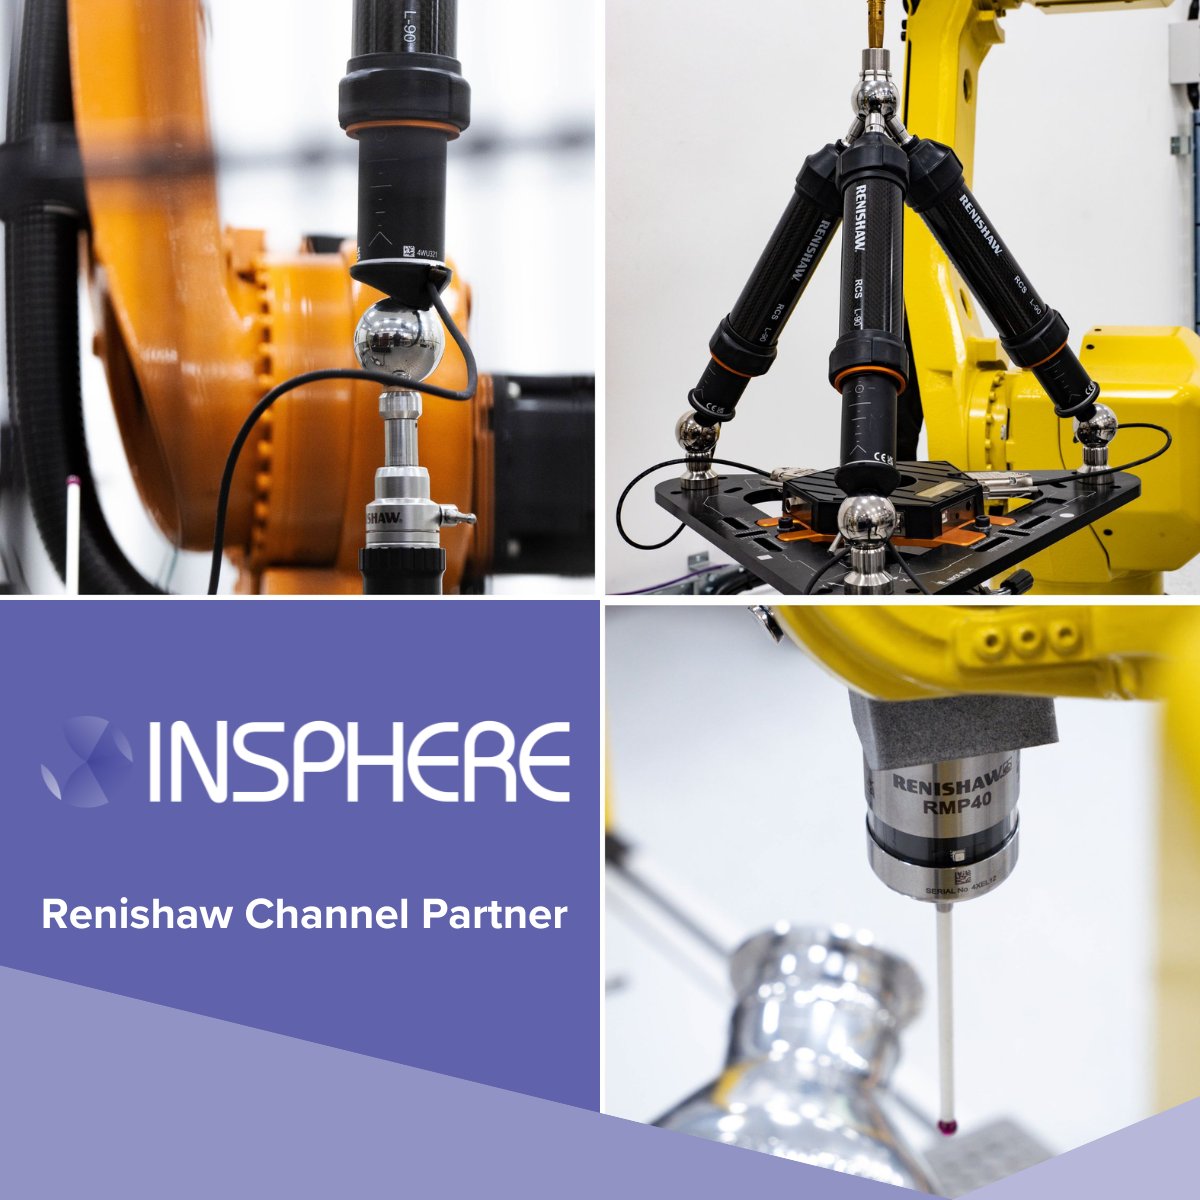 Did you know? We've become the first company to join the Renishaw Channel Partner Programme to specifically provide the Renishaw RCS product series. Find out more here insphereltd.com/renishaw-appoi…